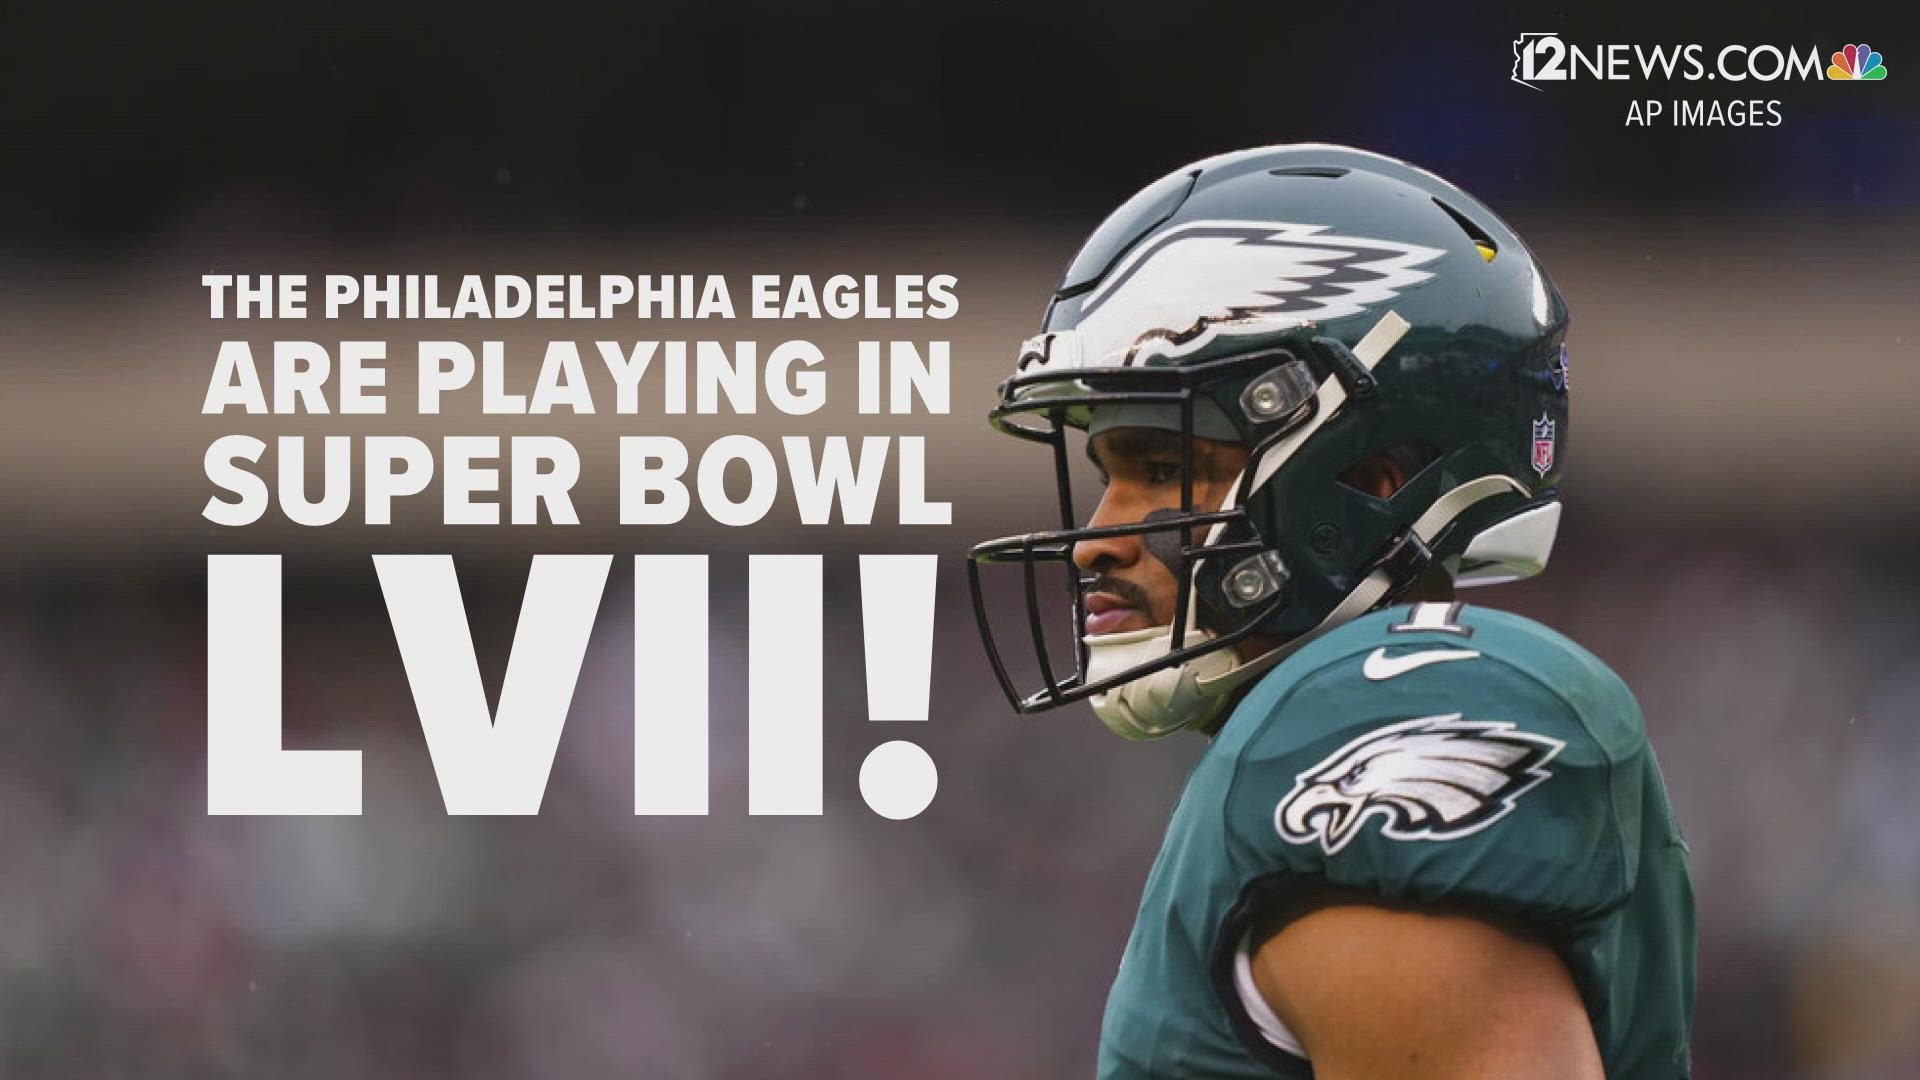 The Philadelphia Eagles are playing in Super Bowl LVII. Here are some interesting facts about the team